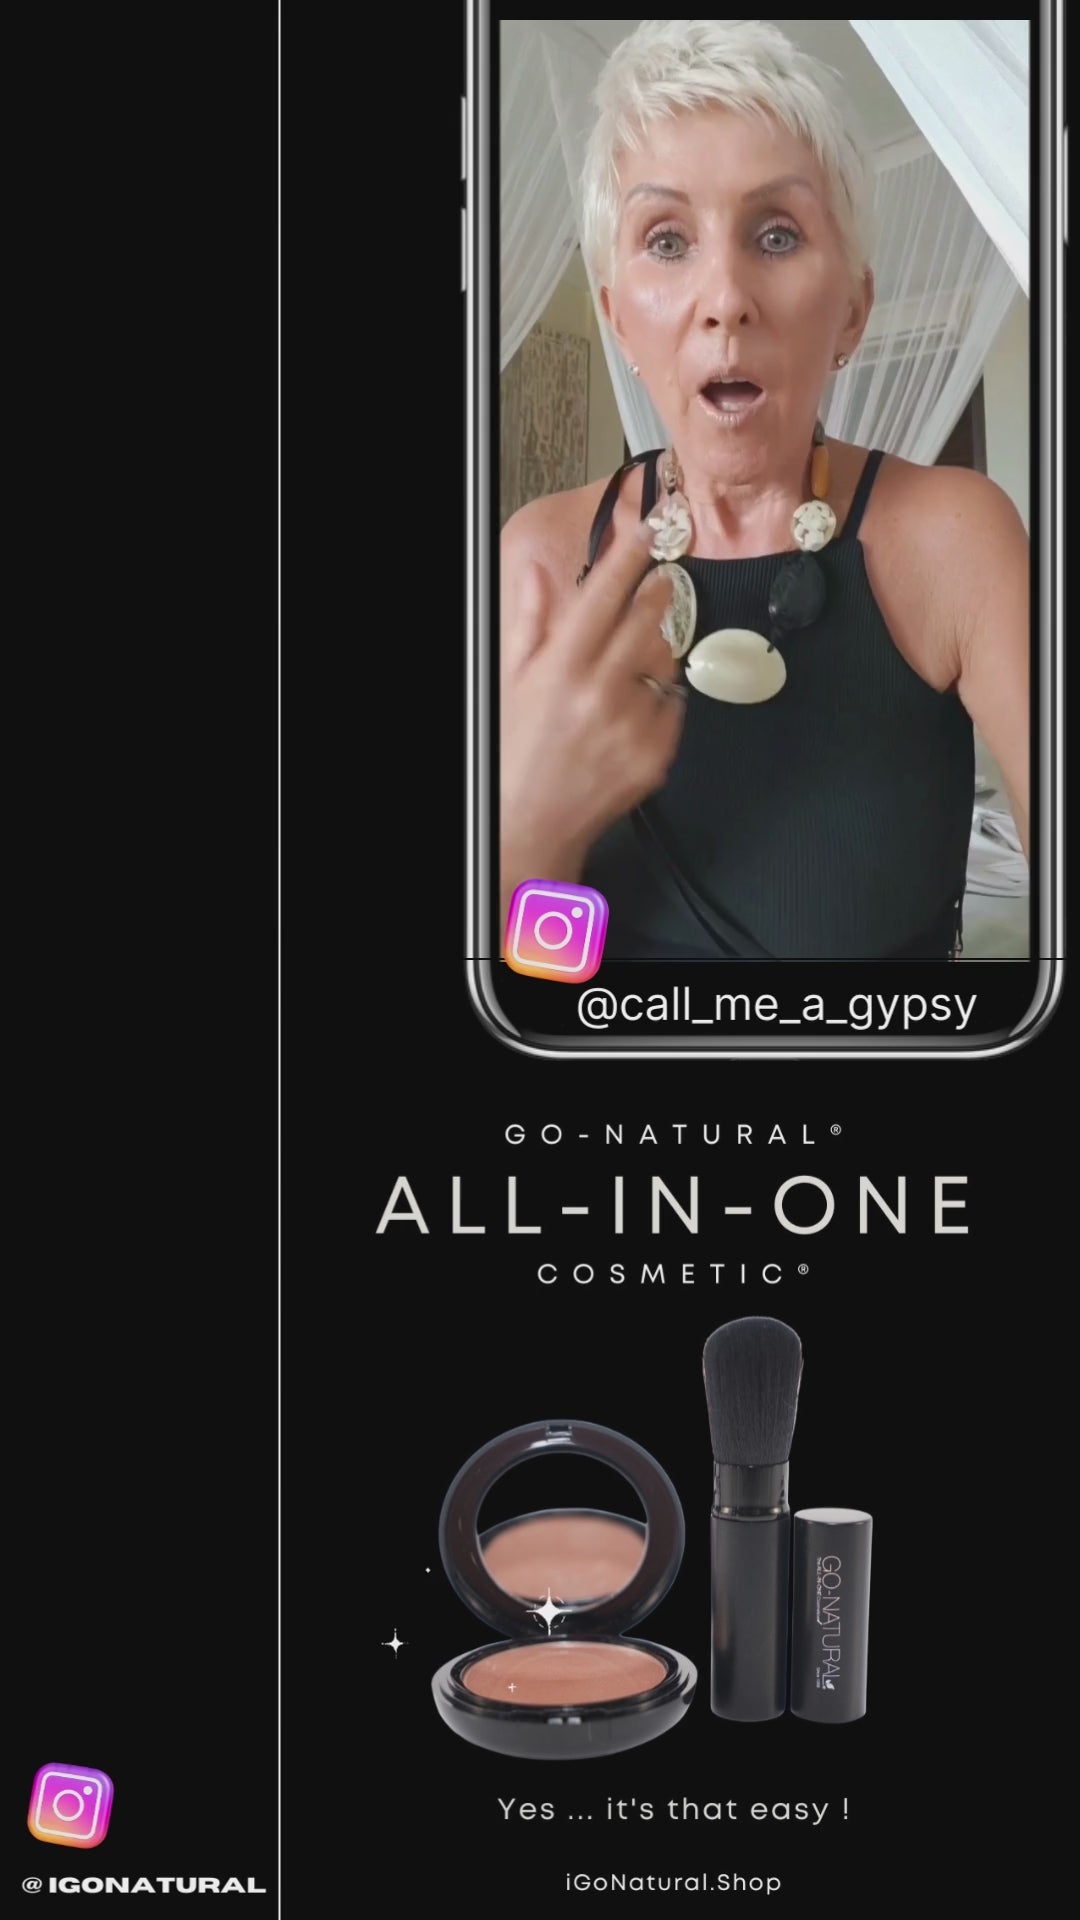 SHORT DEMO 2 - * WATCH Our 50 Plus Beauty Brand Ambassador  * The classy & beautiful Sheila From Bali @call_me_a_gypsy - 1 Product ... 45 Seconds !  As Easy As 1, 2, 3  * GO-NATURAL® ALL-IN-ONE Cosmetic®    … it’s that easy !  